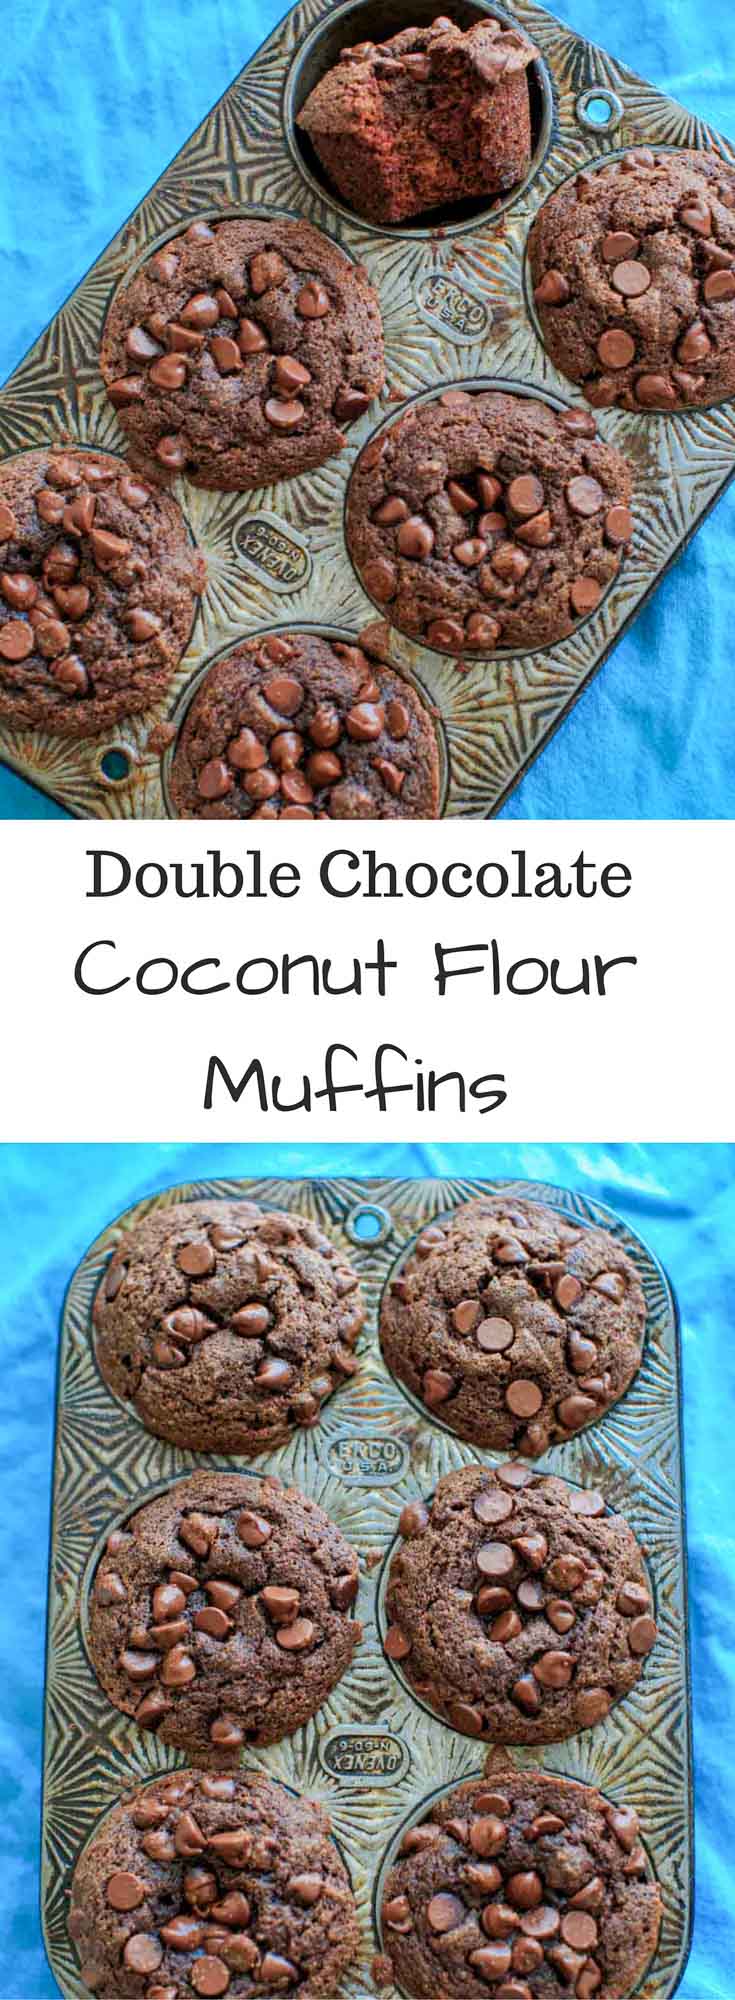 Double Chocolate Coconut Flour Muffins - gluten-free